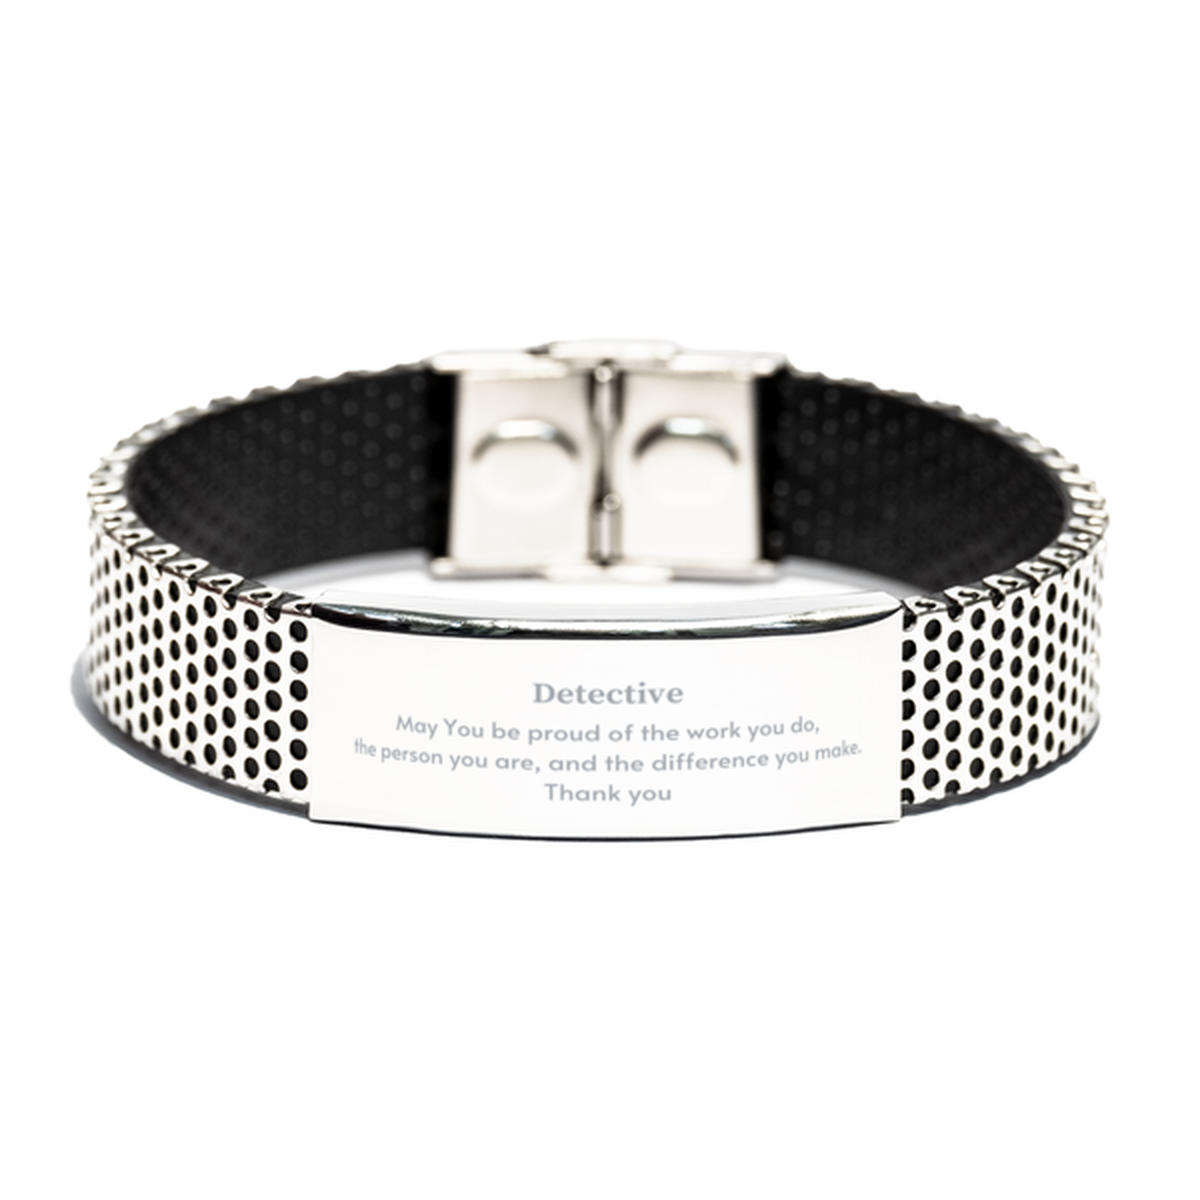 Heartwarming Stainless Steel Bracelet Retirement Coworkers Gifts for Detective, Detective May You be proud of the work you do, the person you are Gifts for Boss Men Women Friends